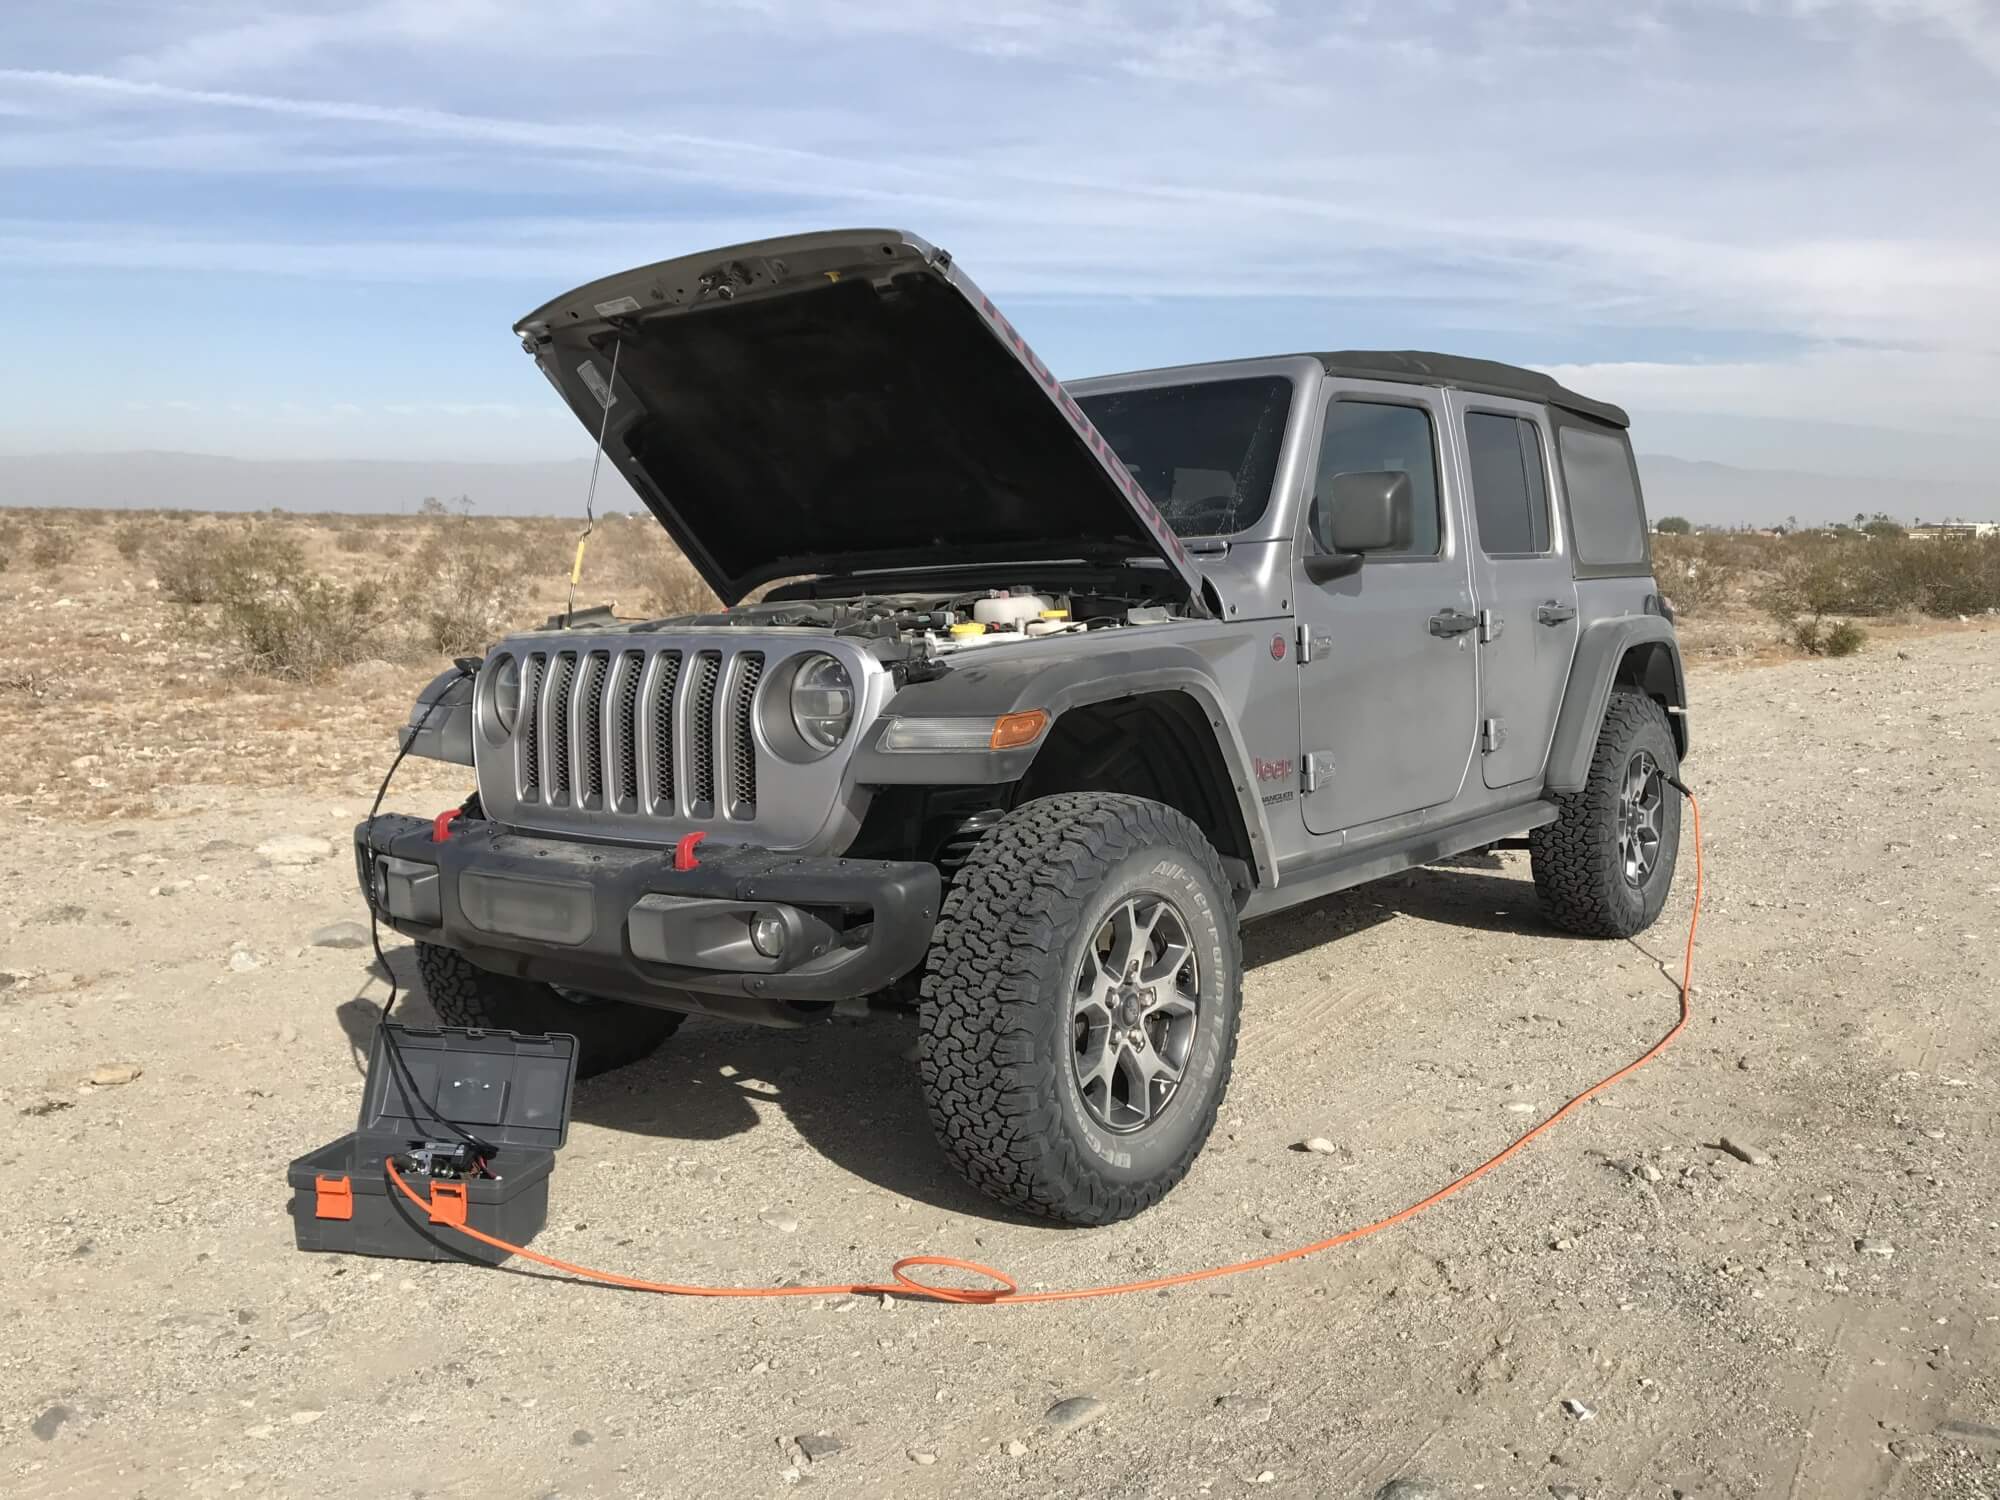 Top Air Compressors For Your Jeep - The Dirt by 4WP